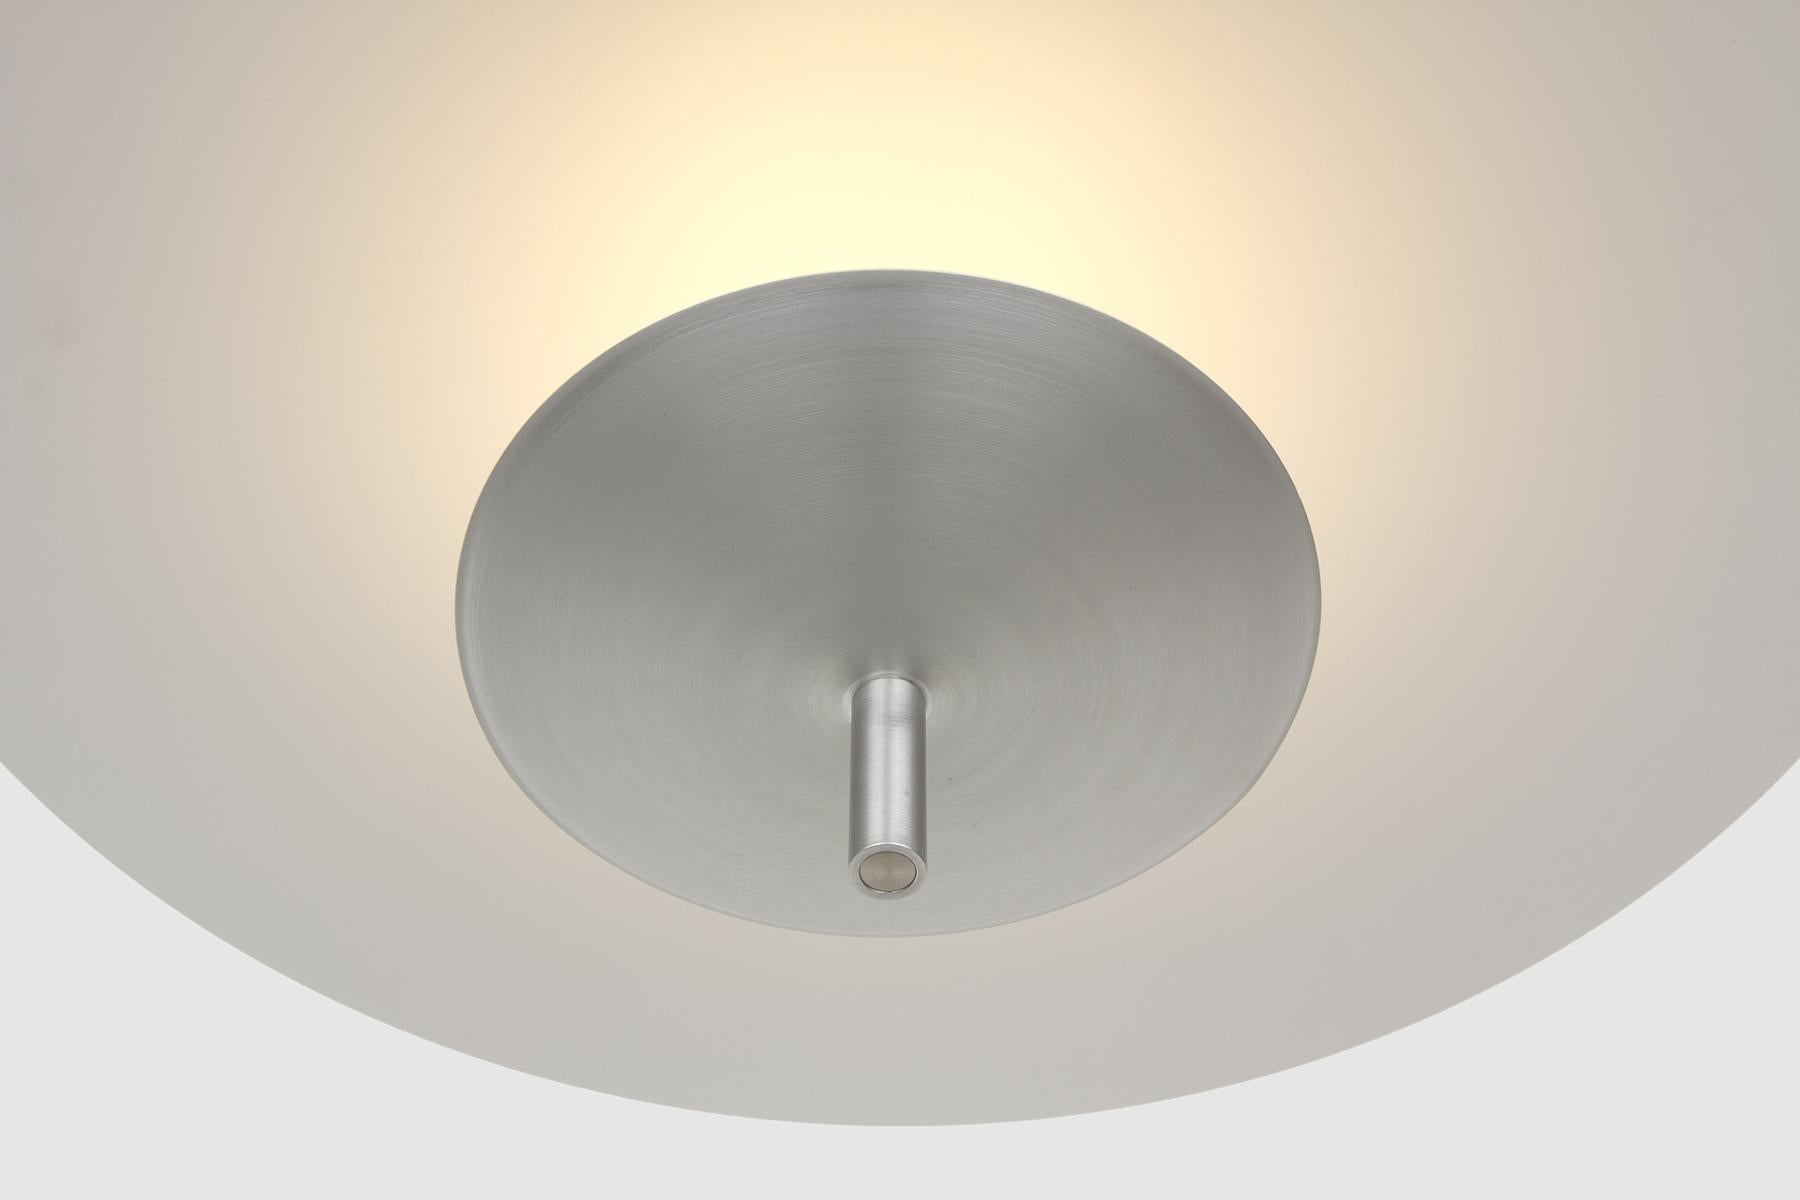 The Reflector pendant is a sophisticated soft lighting option suited for dining tables, workspaces, hallways and other indoor environments that require a diffused and warm lighting experience. 

Light is cast onto a floating reflector, washing the